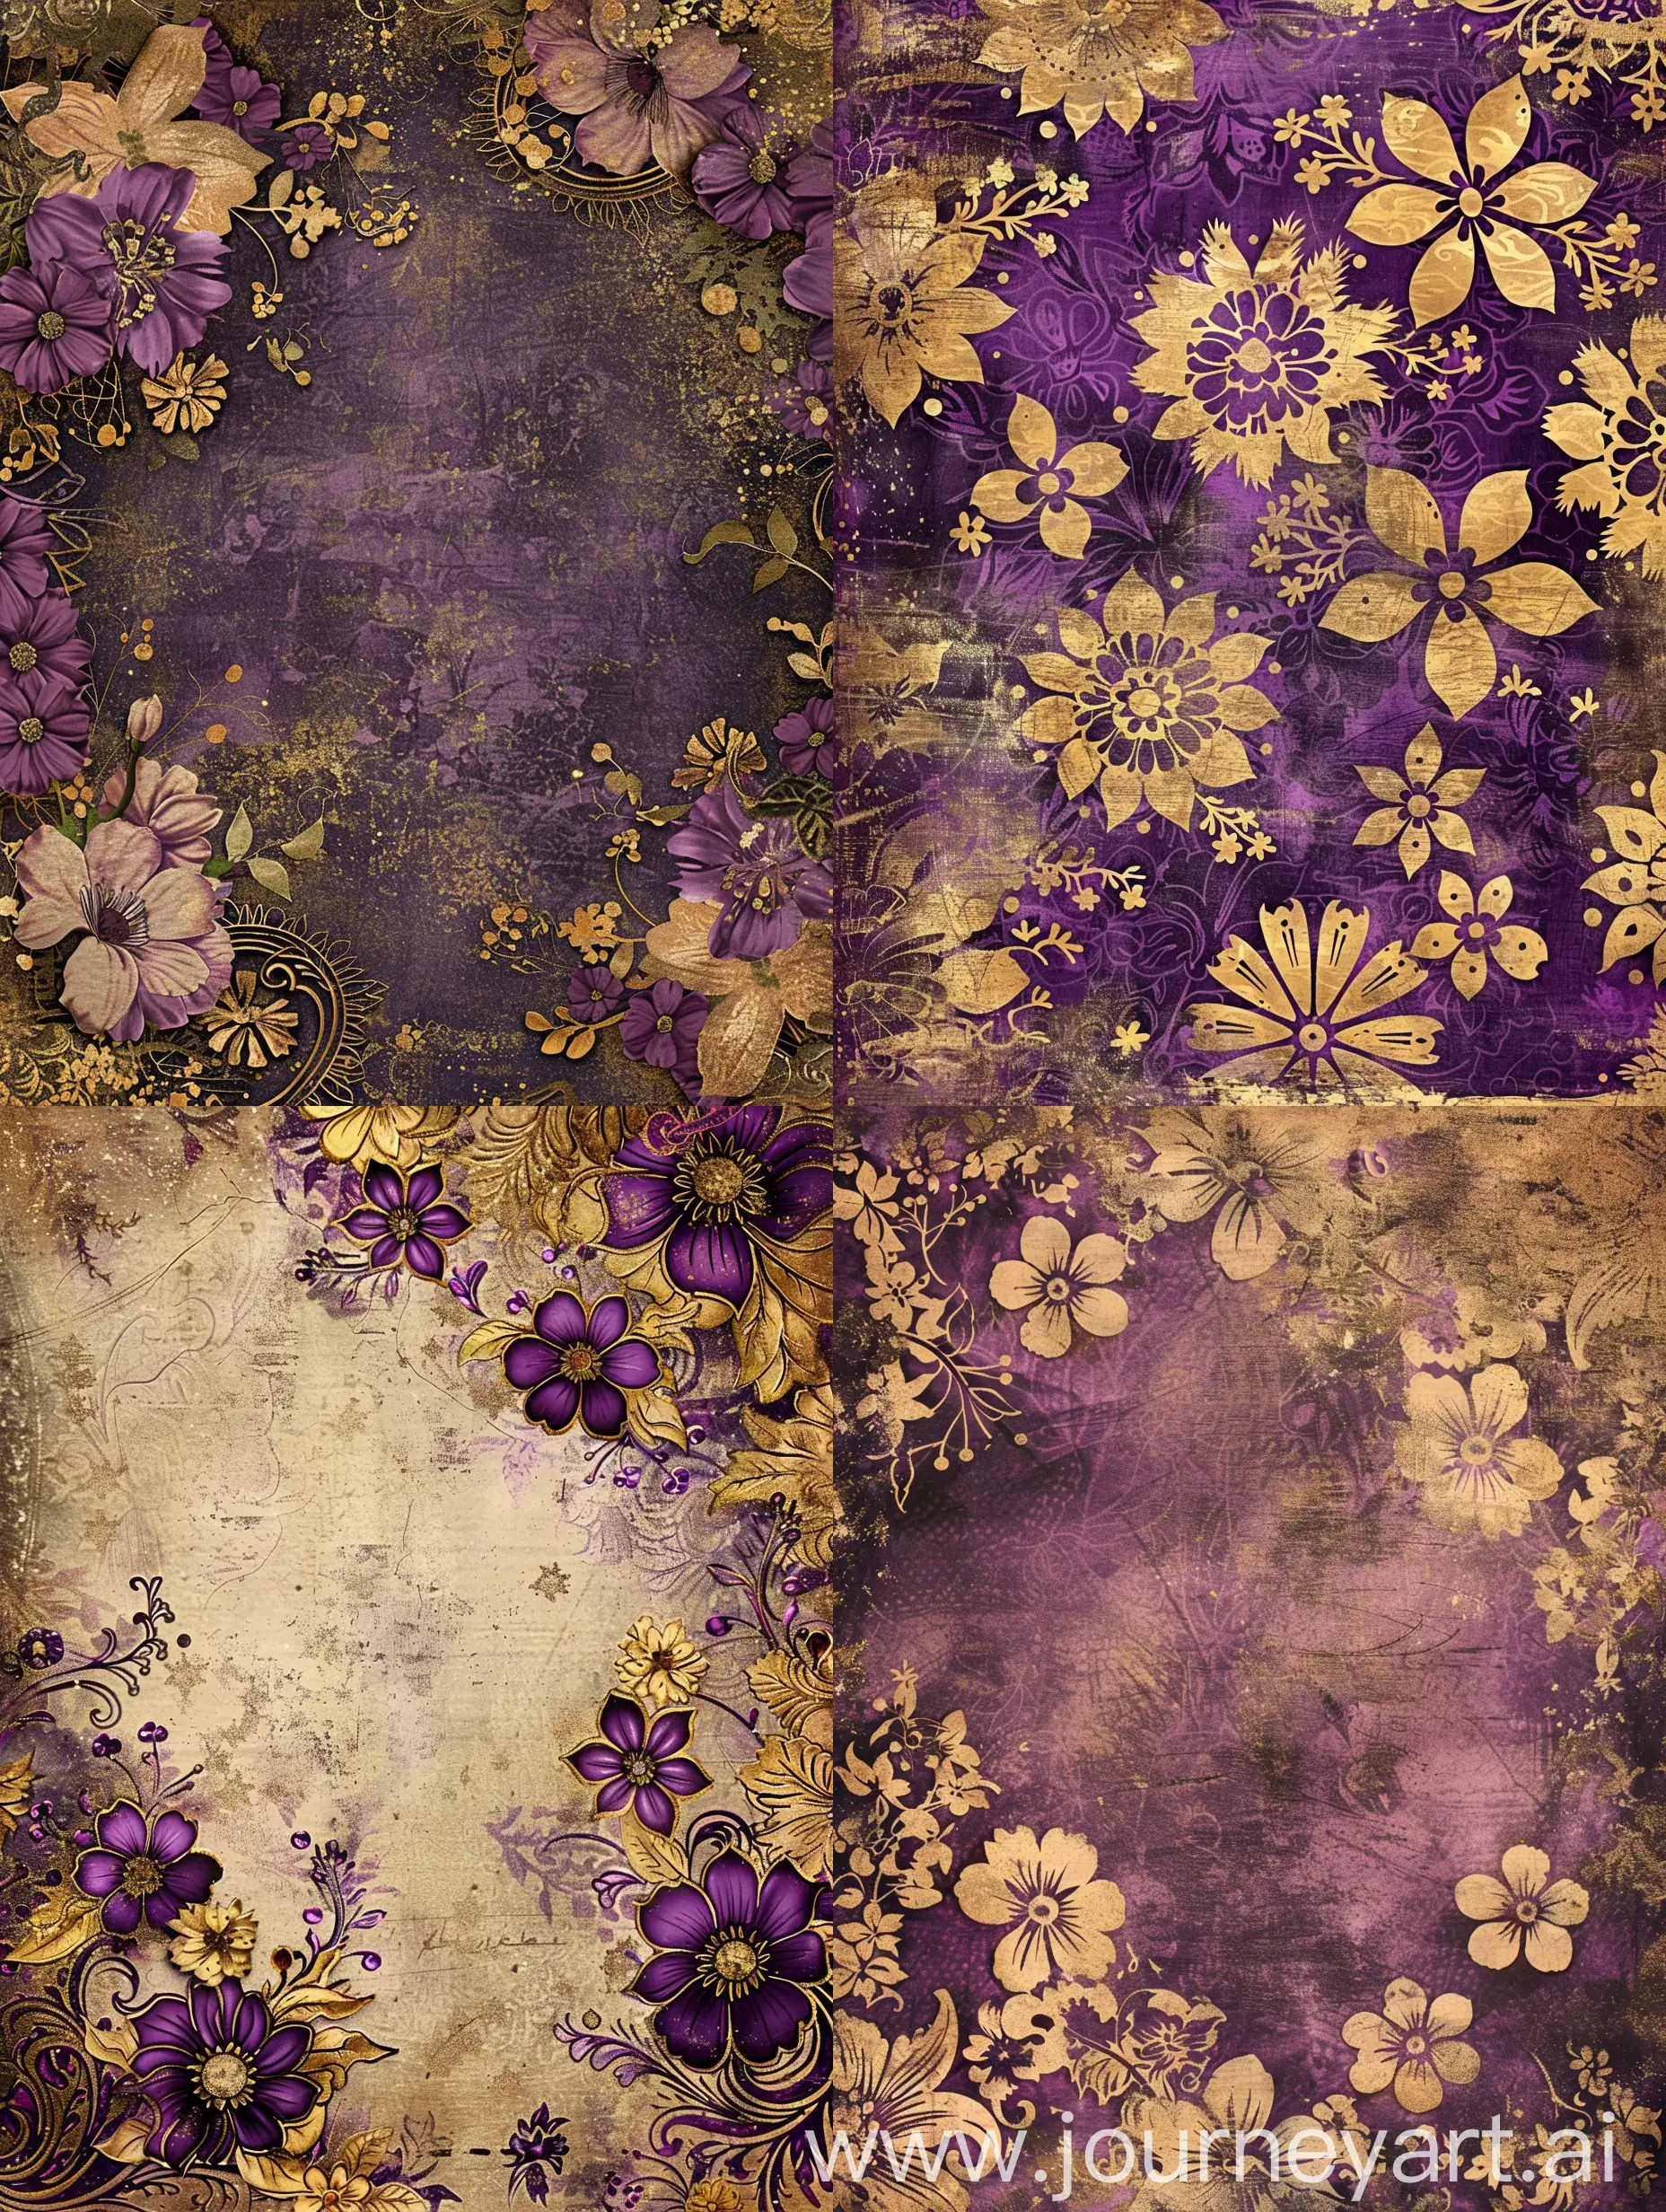 Floral-Fantasy-Journal-Digital-Paper-in-Purple-and-Gold